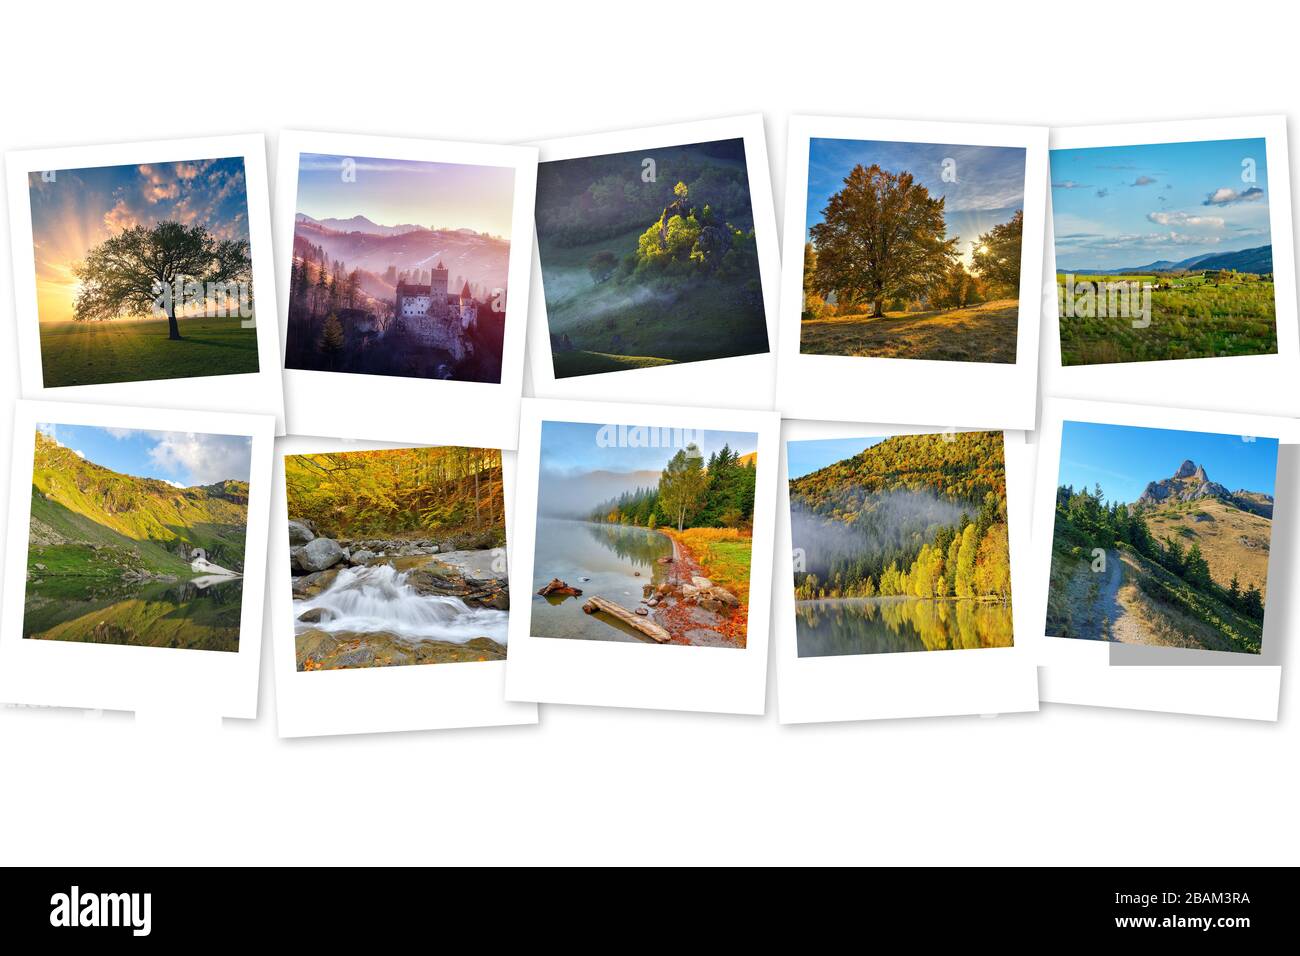 Photo collage with nature landscape photos. Mountains, lakes, trees, sunsets. Photography concept Stock Photo